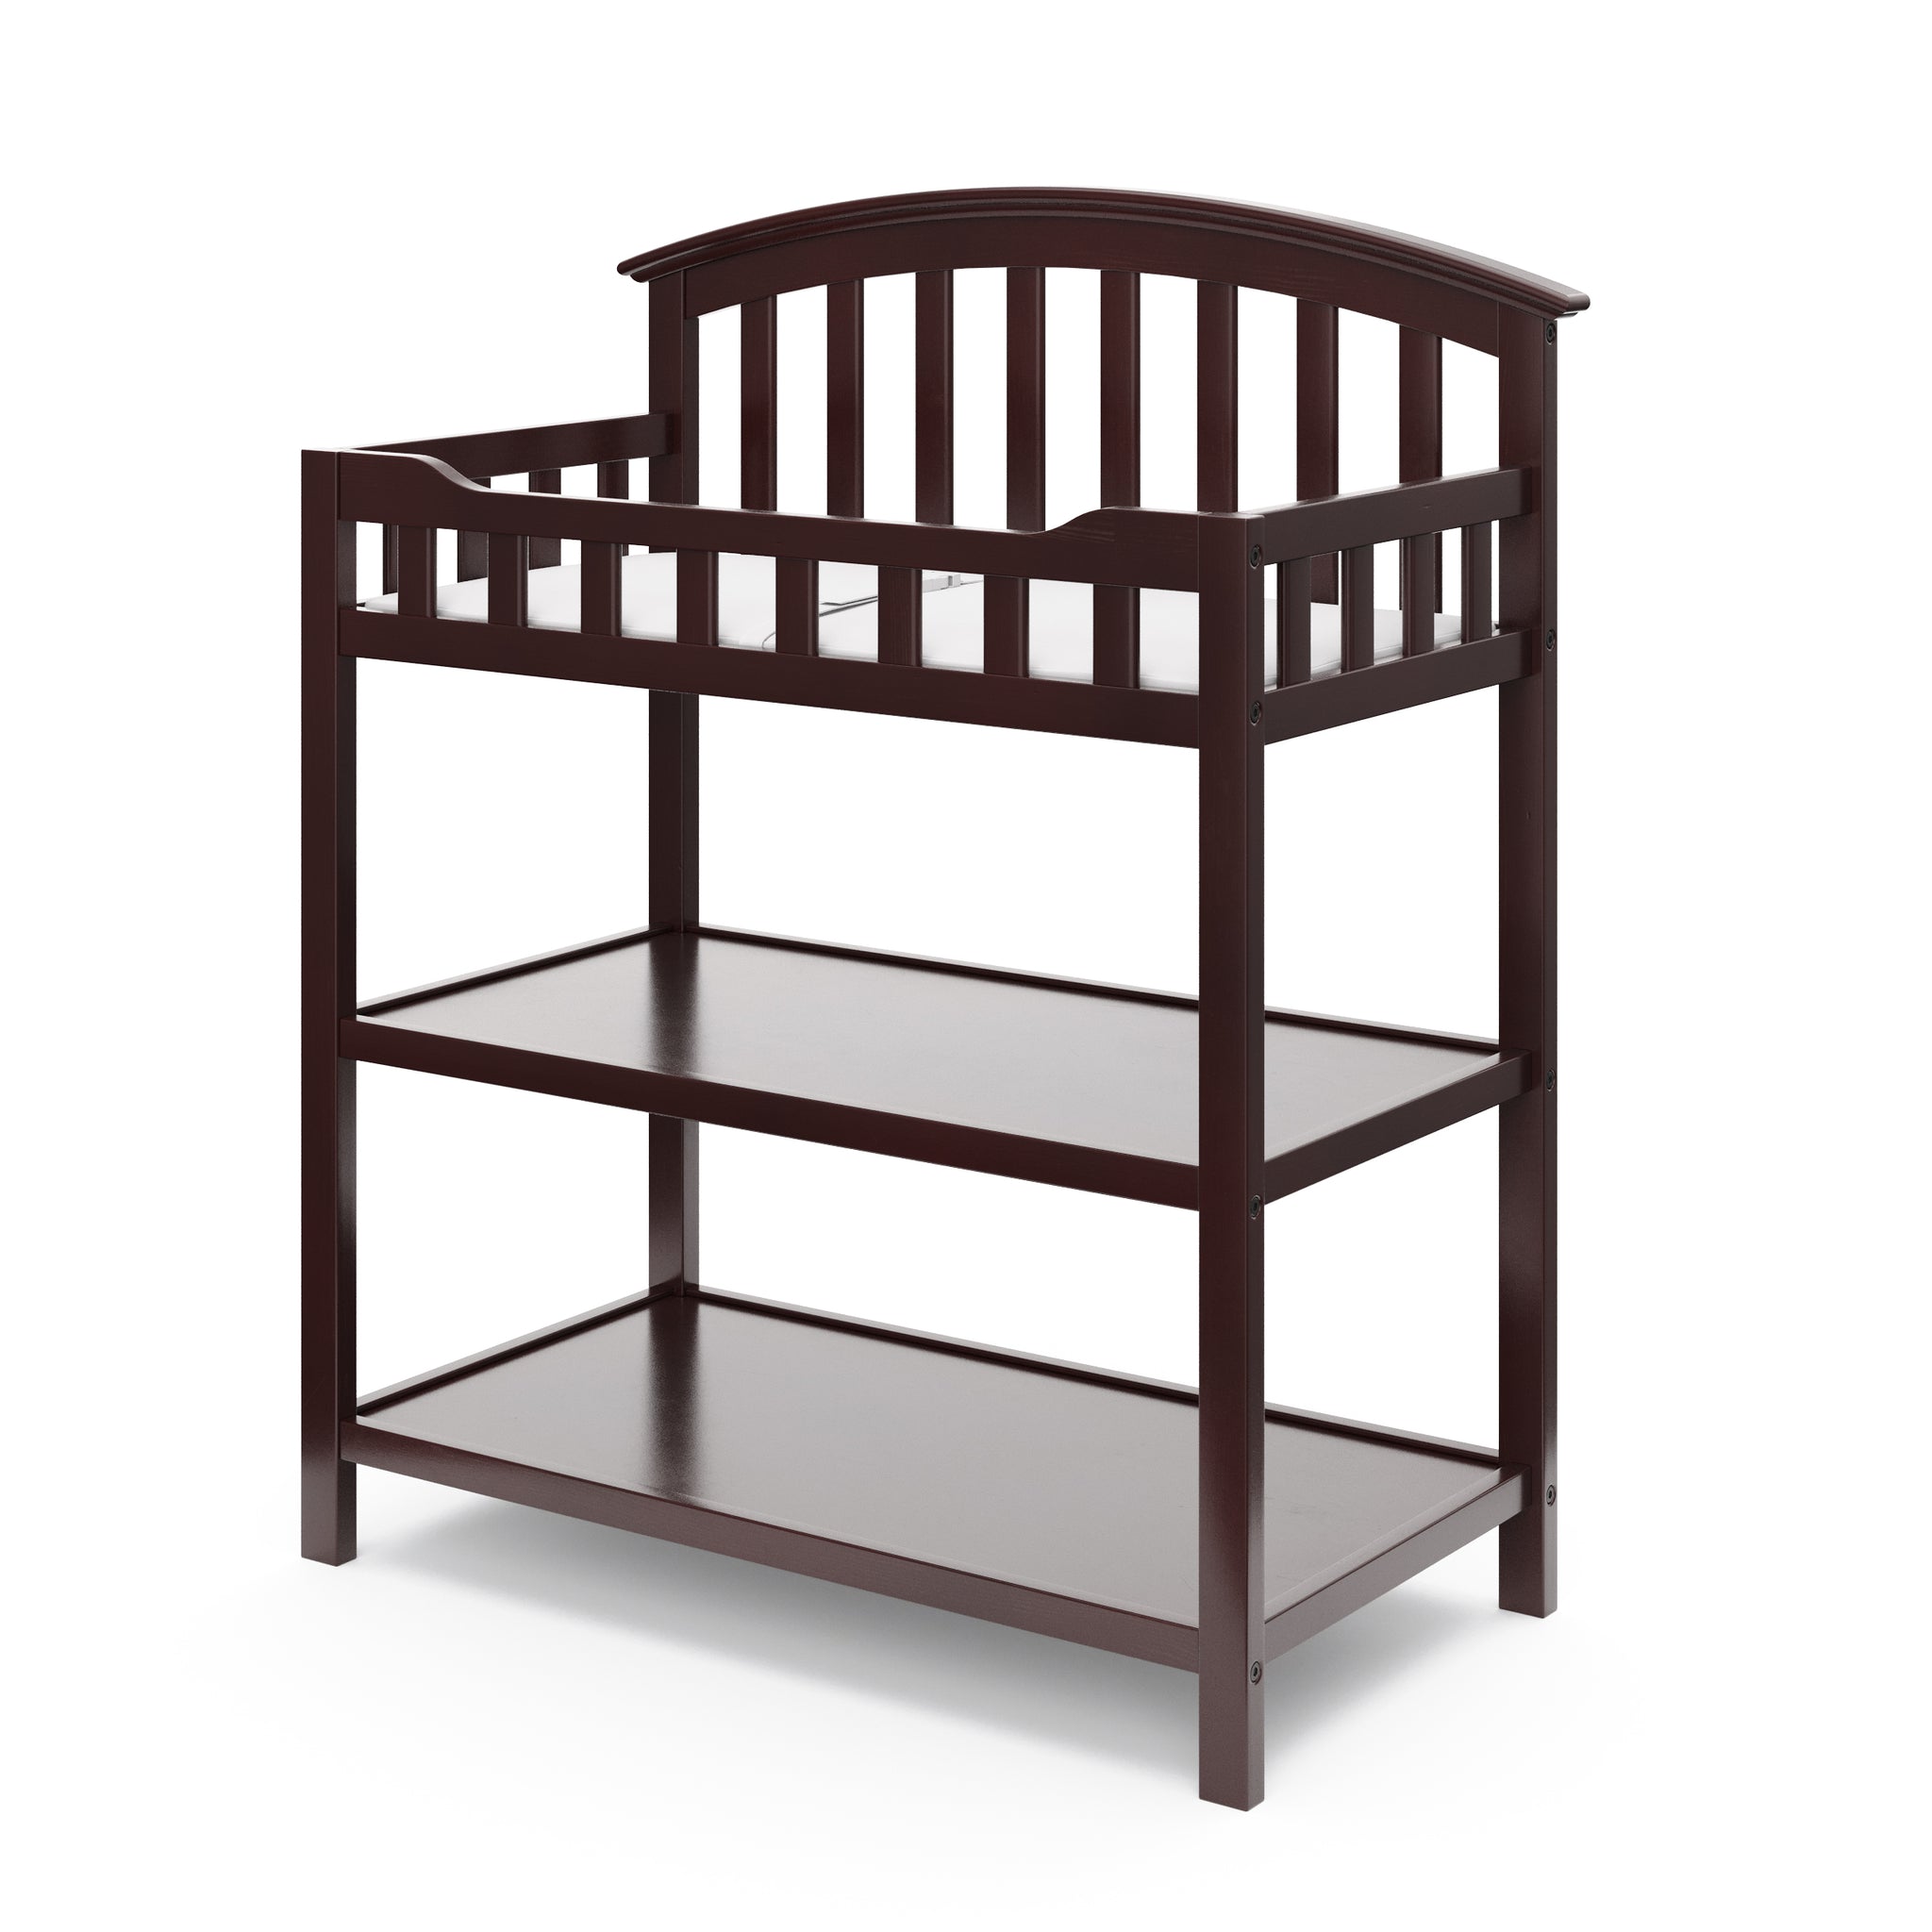  espresso angled changing table with two open shelves